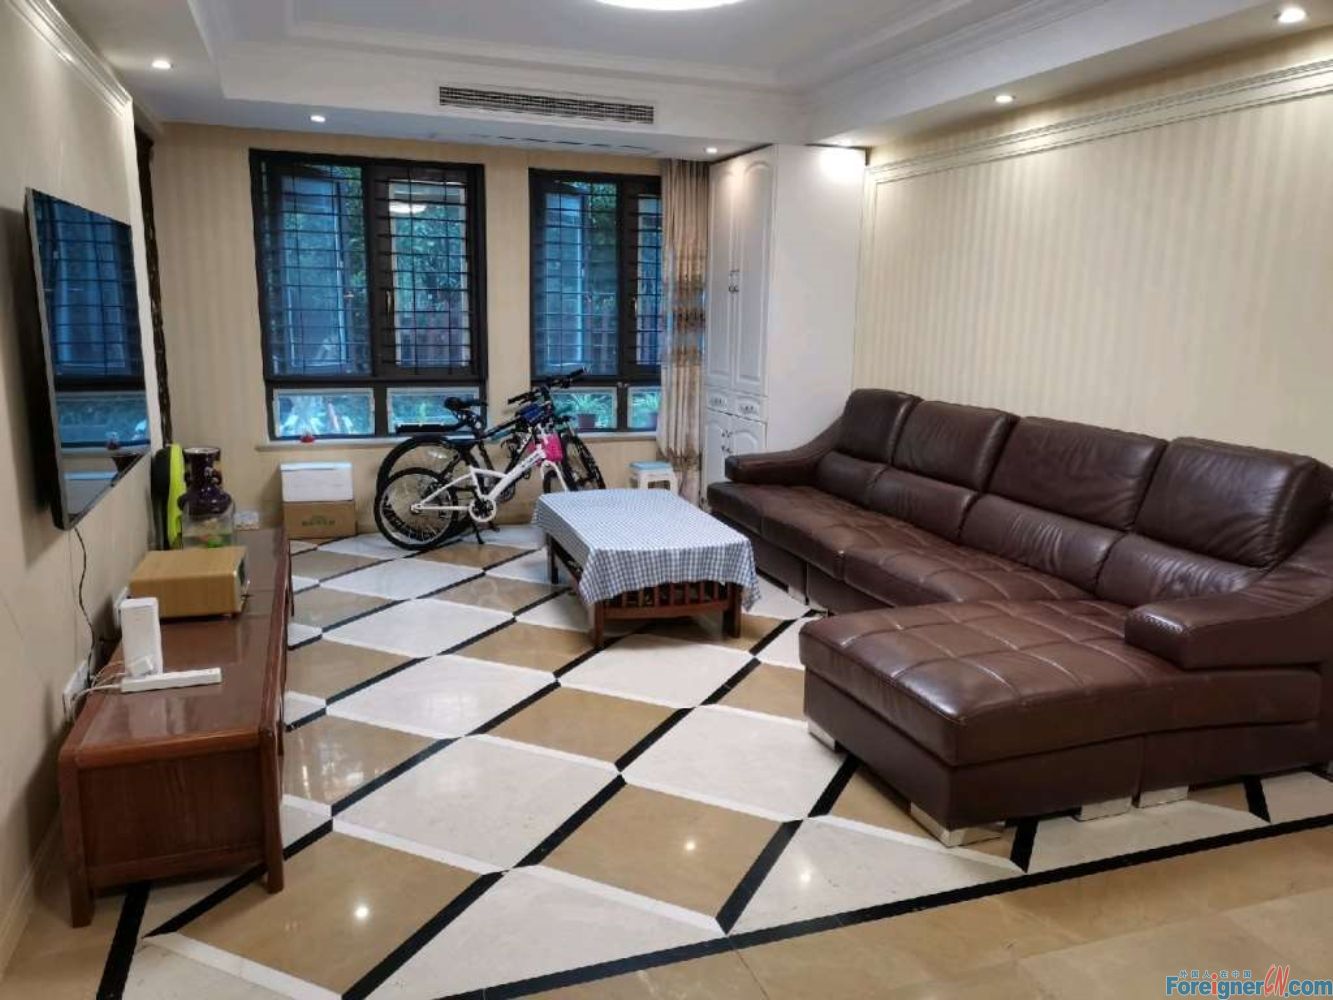 Wow! ! ! Garden apartment to rent / 4 bedrooms and 2 bathrooms/close to international schools and AEON shopping mall/close to Baitang Park/Suzhou /SIP